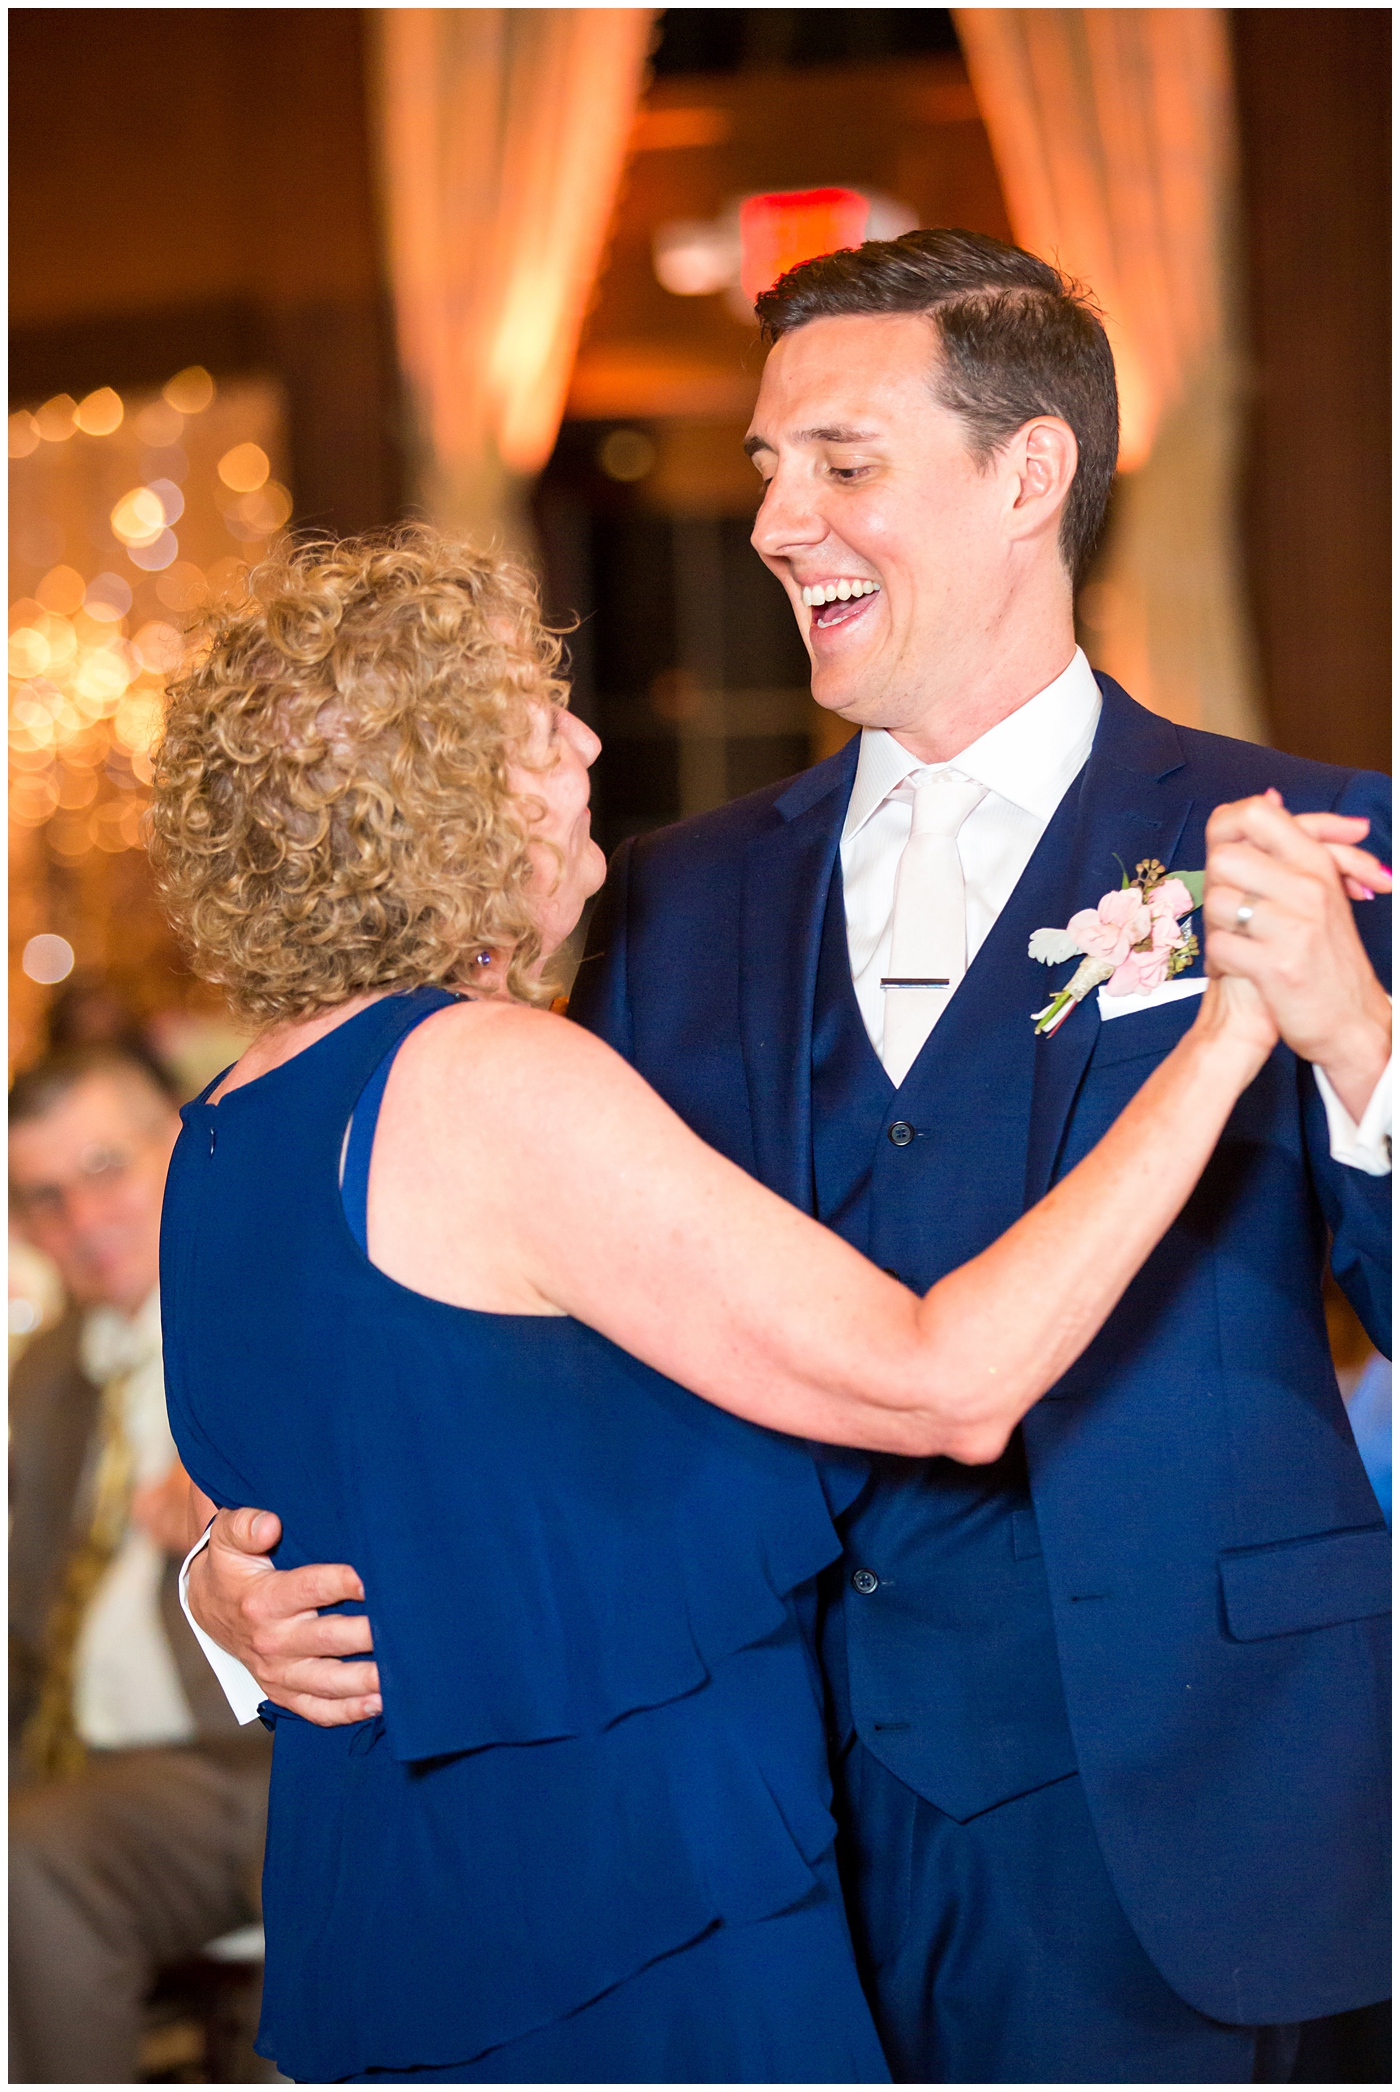 groom in blue suit with rose boutonniere with mother for mother son dance in ballroom reception